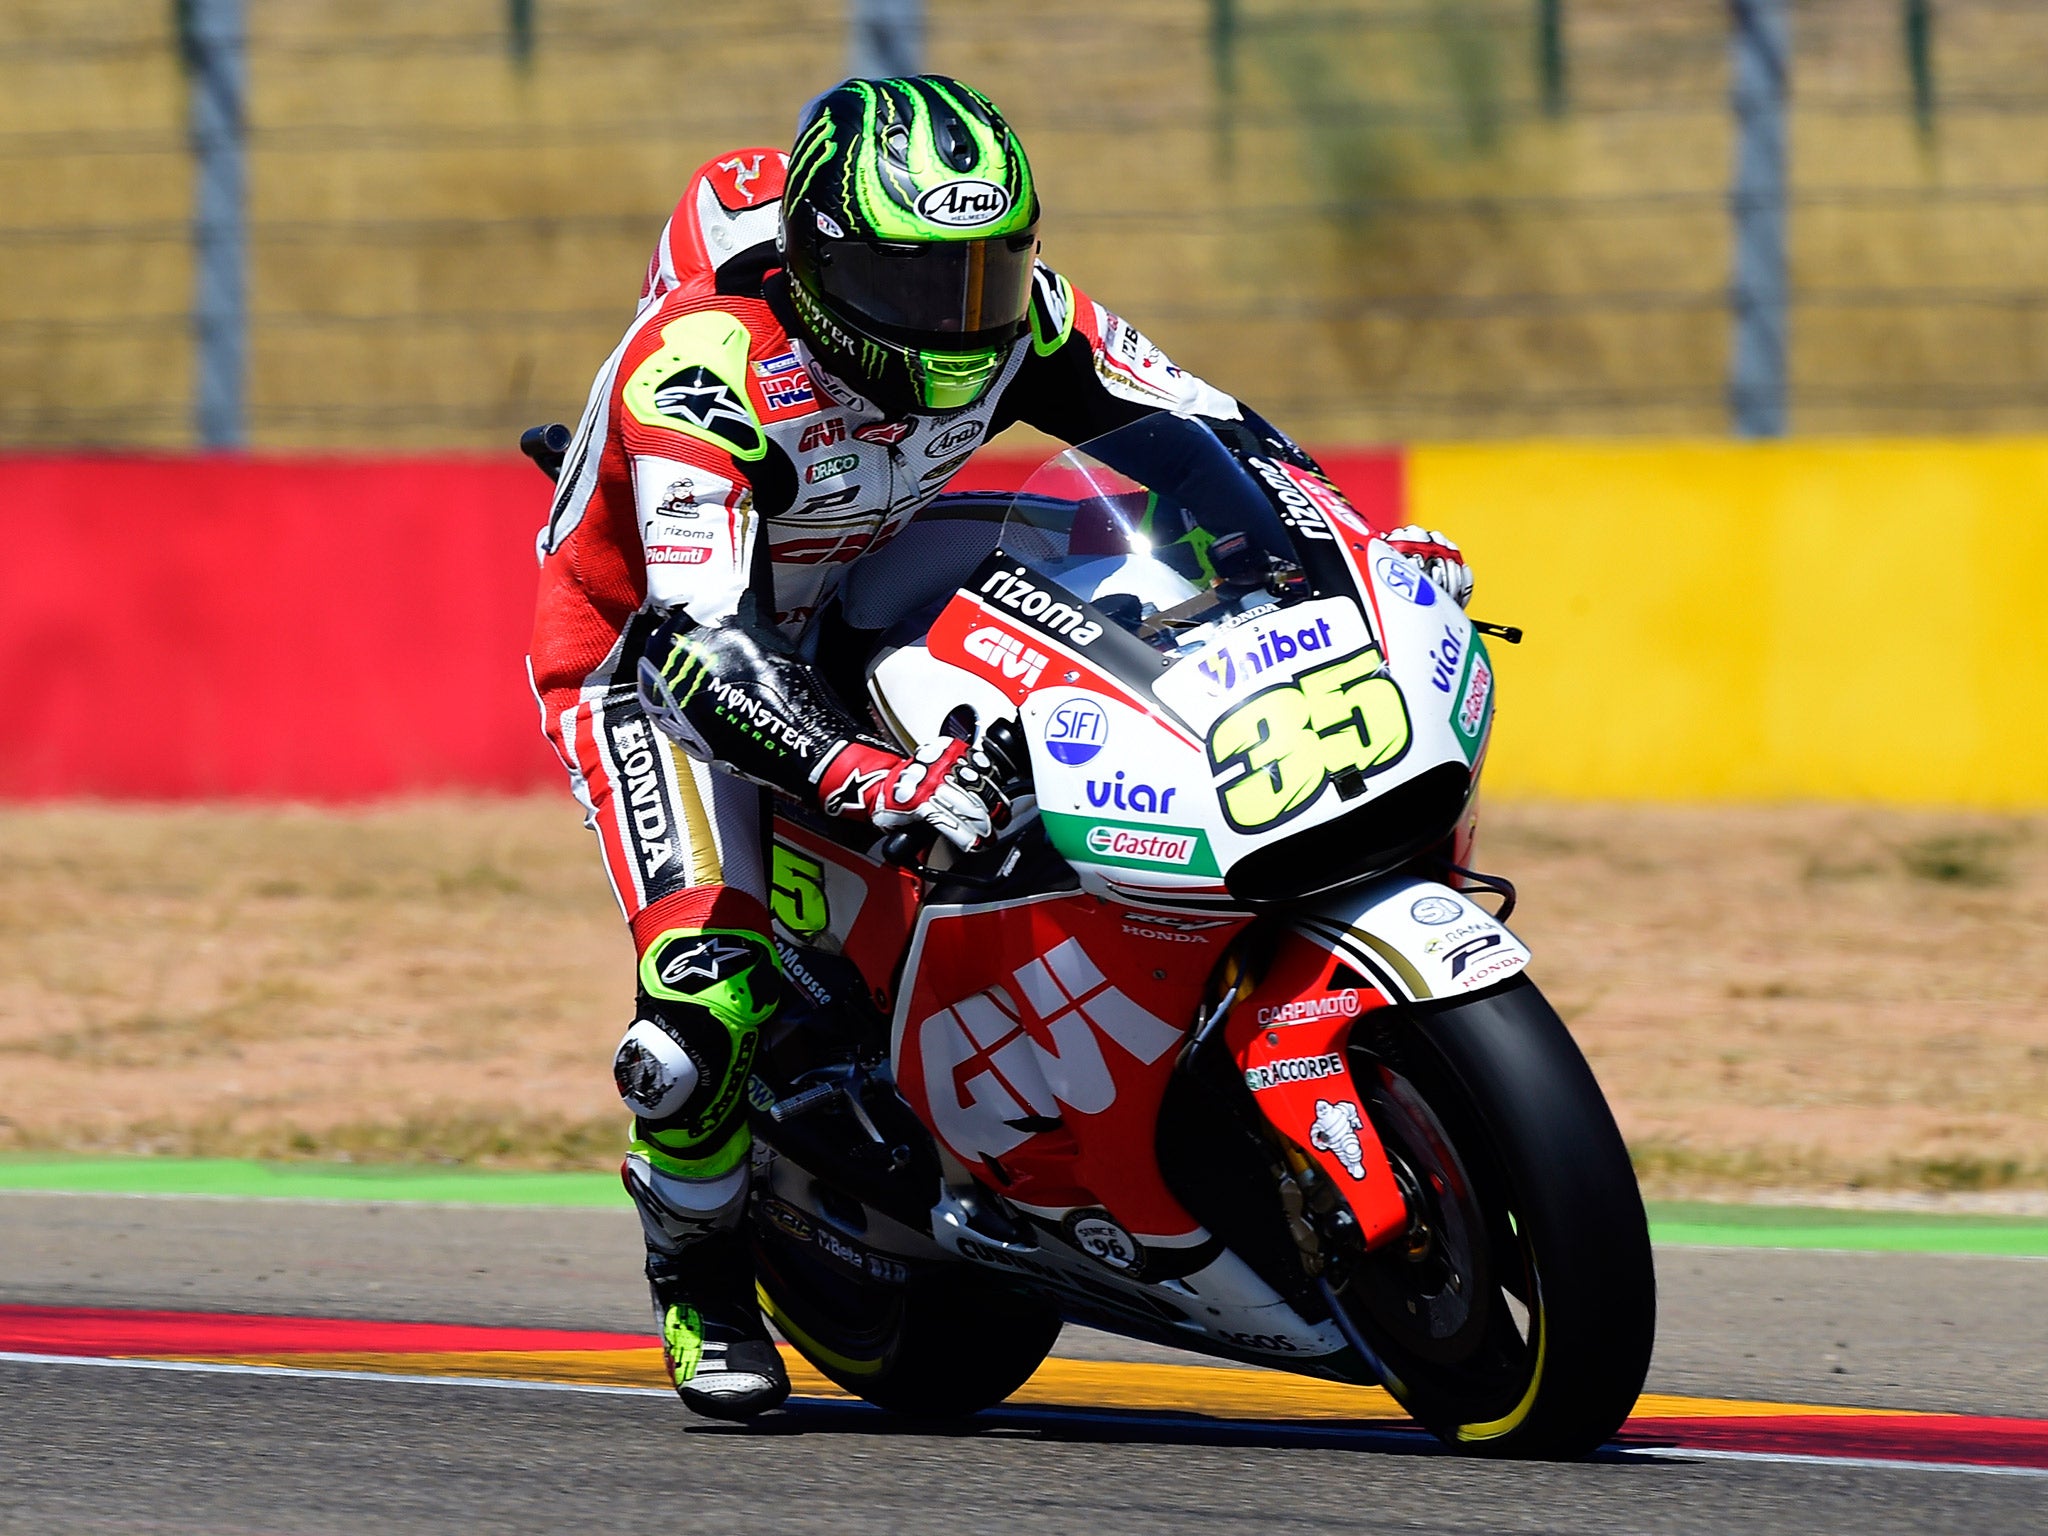 Cal Crutchlow took fifth to continue his strong form